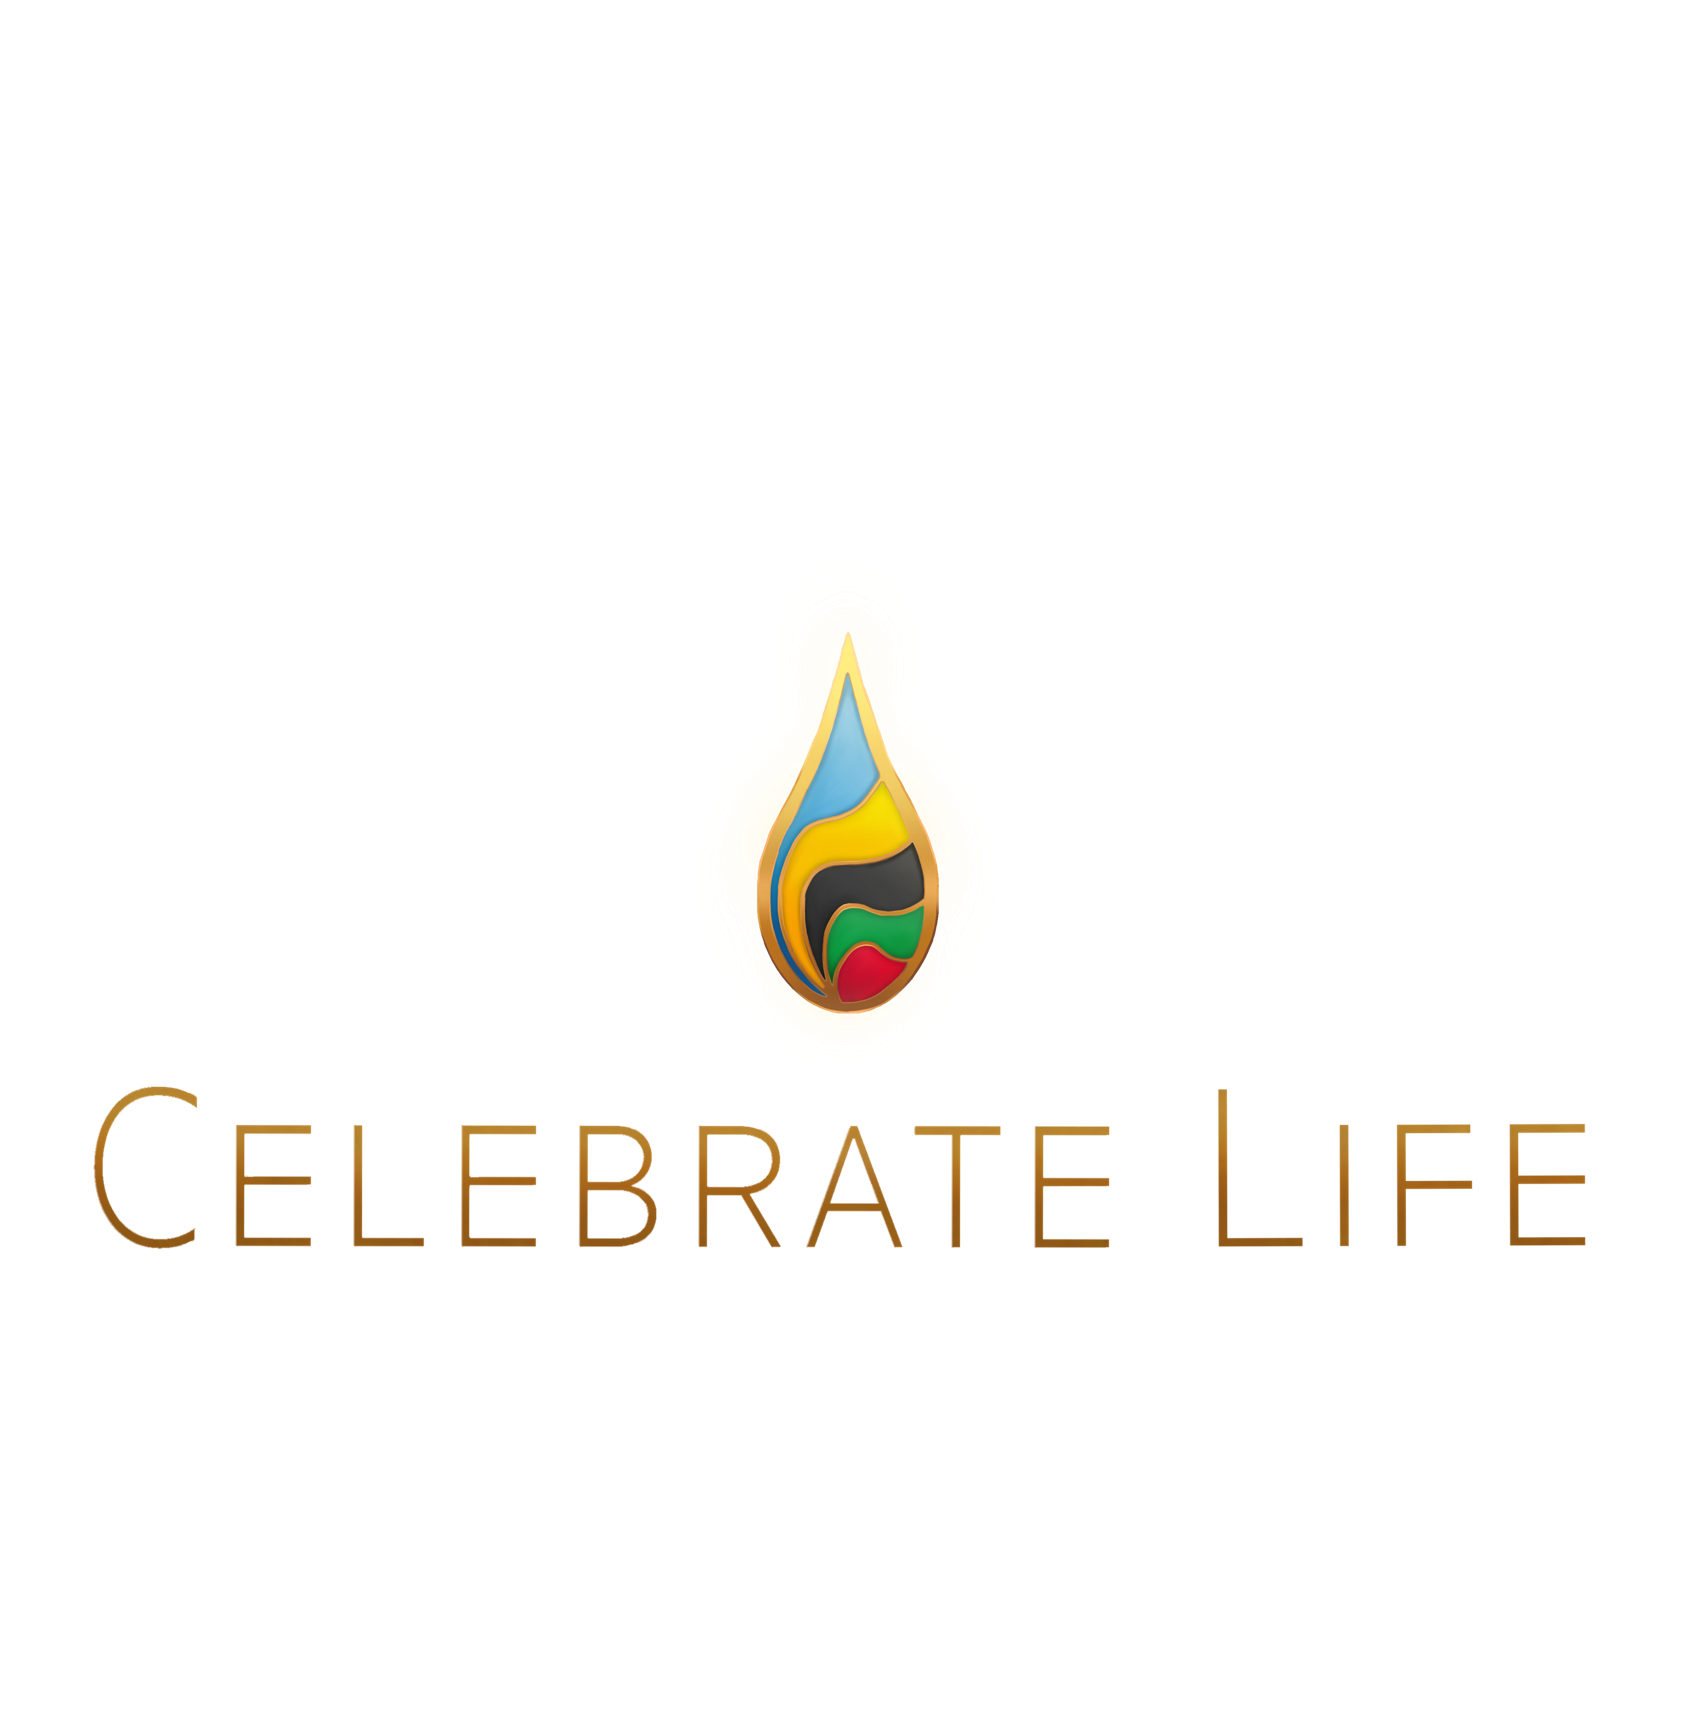 Celebrate life on front